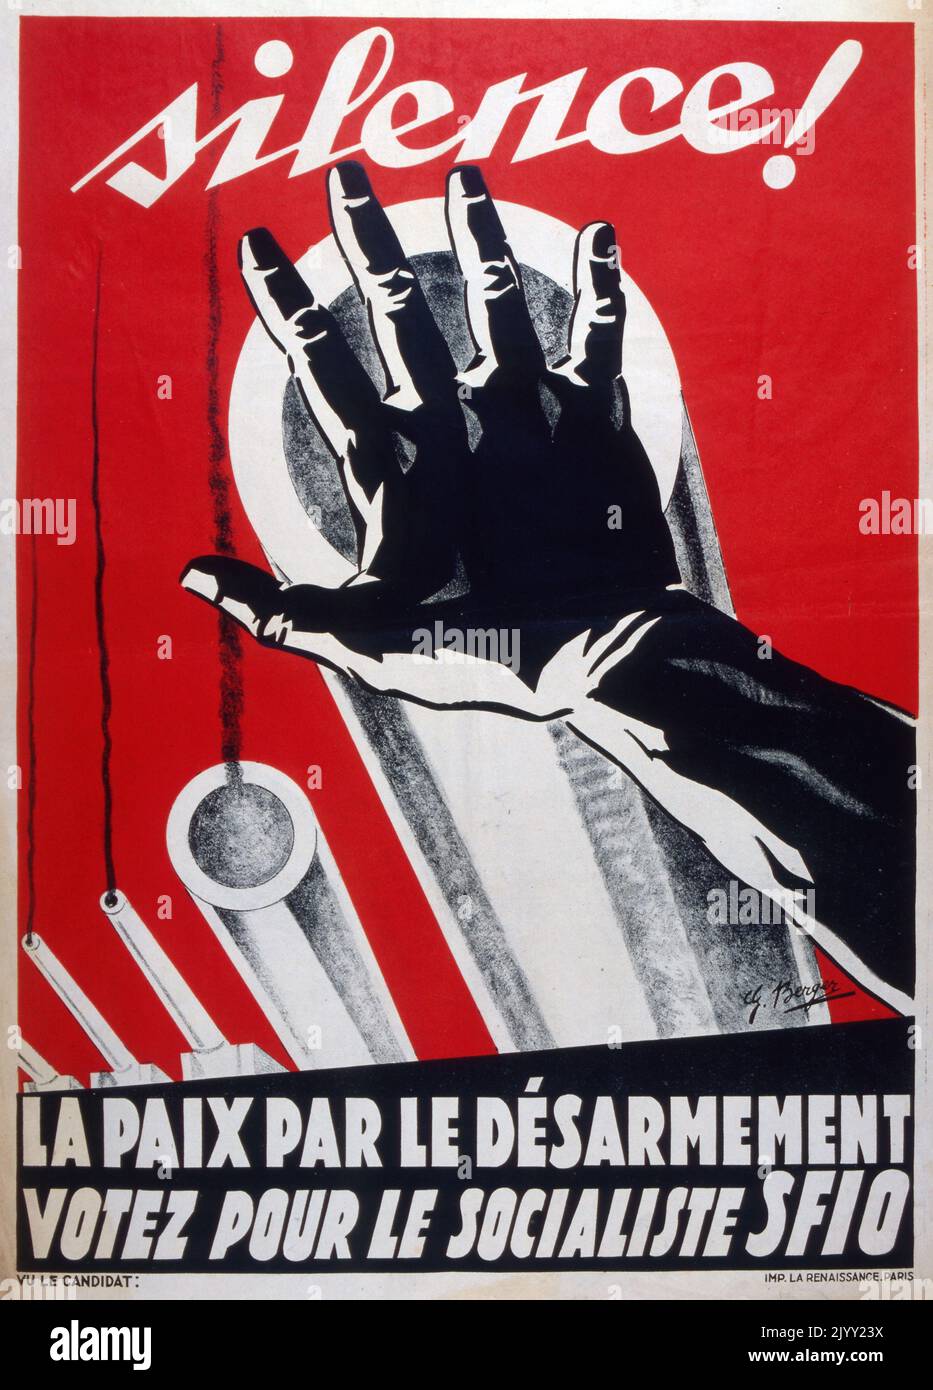 Political propaganda Poster by Berger, for the French Socialist Party during the 1932 legislative Assembly elections. The slogan reads: Silence! la paix par le desarmement (Silence! peace through disarmament). Stock Photo